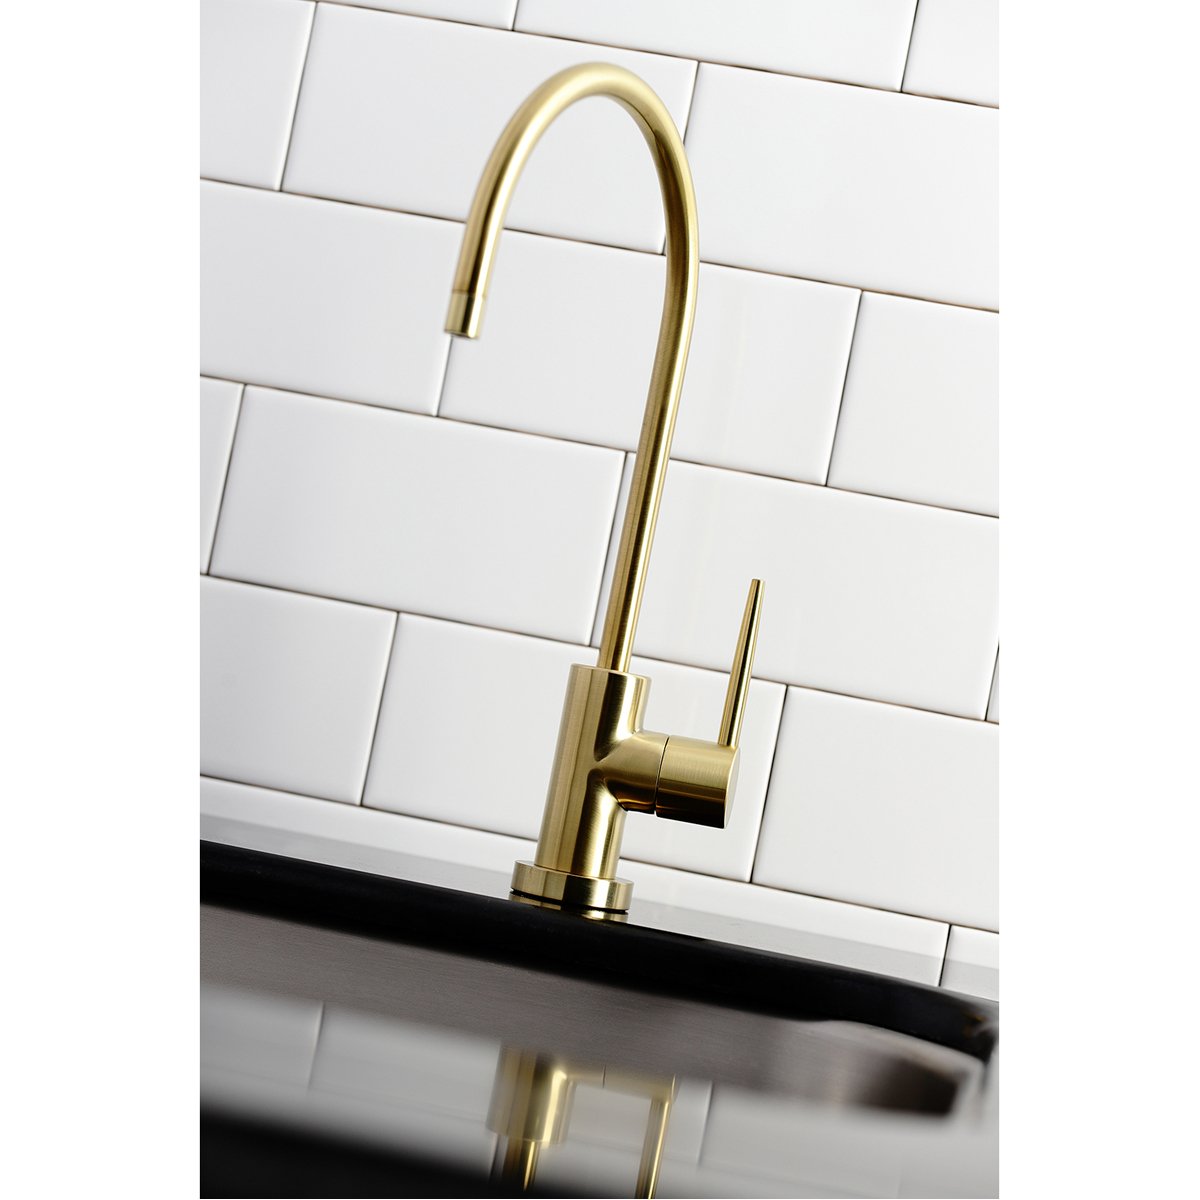 Kingston Brass New York Deck Mount Single-Handle Cold Water Filtration Faucet